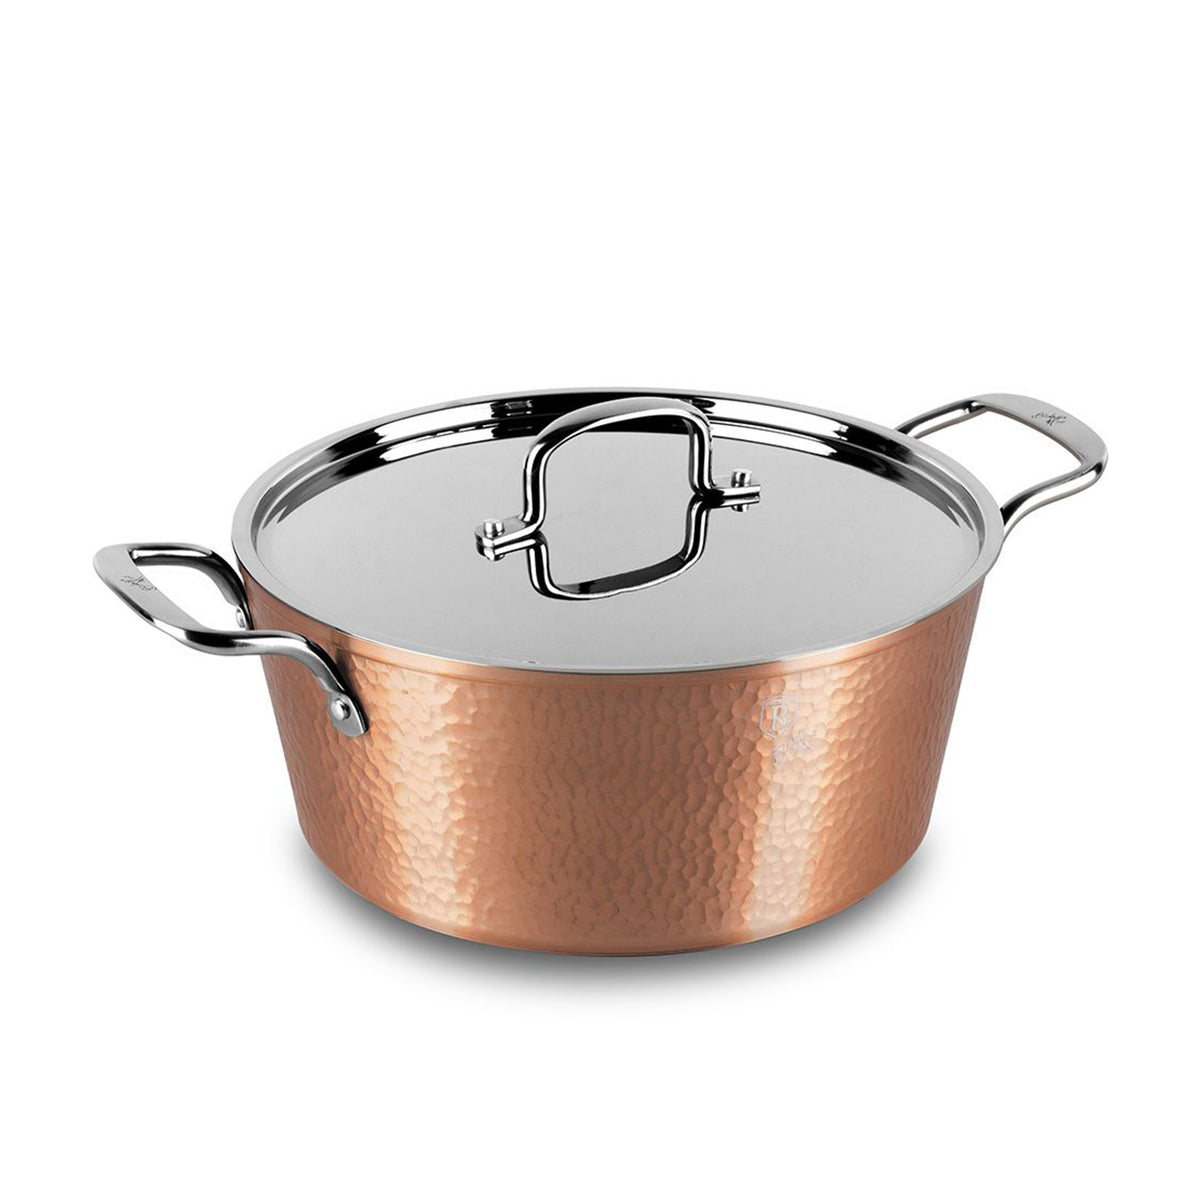 Hammered casserole with stainless steel lid and handles size 24 cm copper color